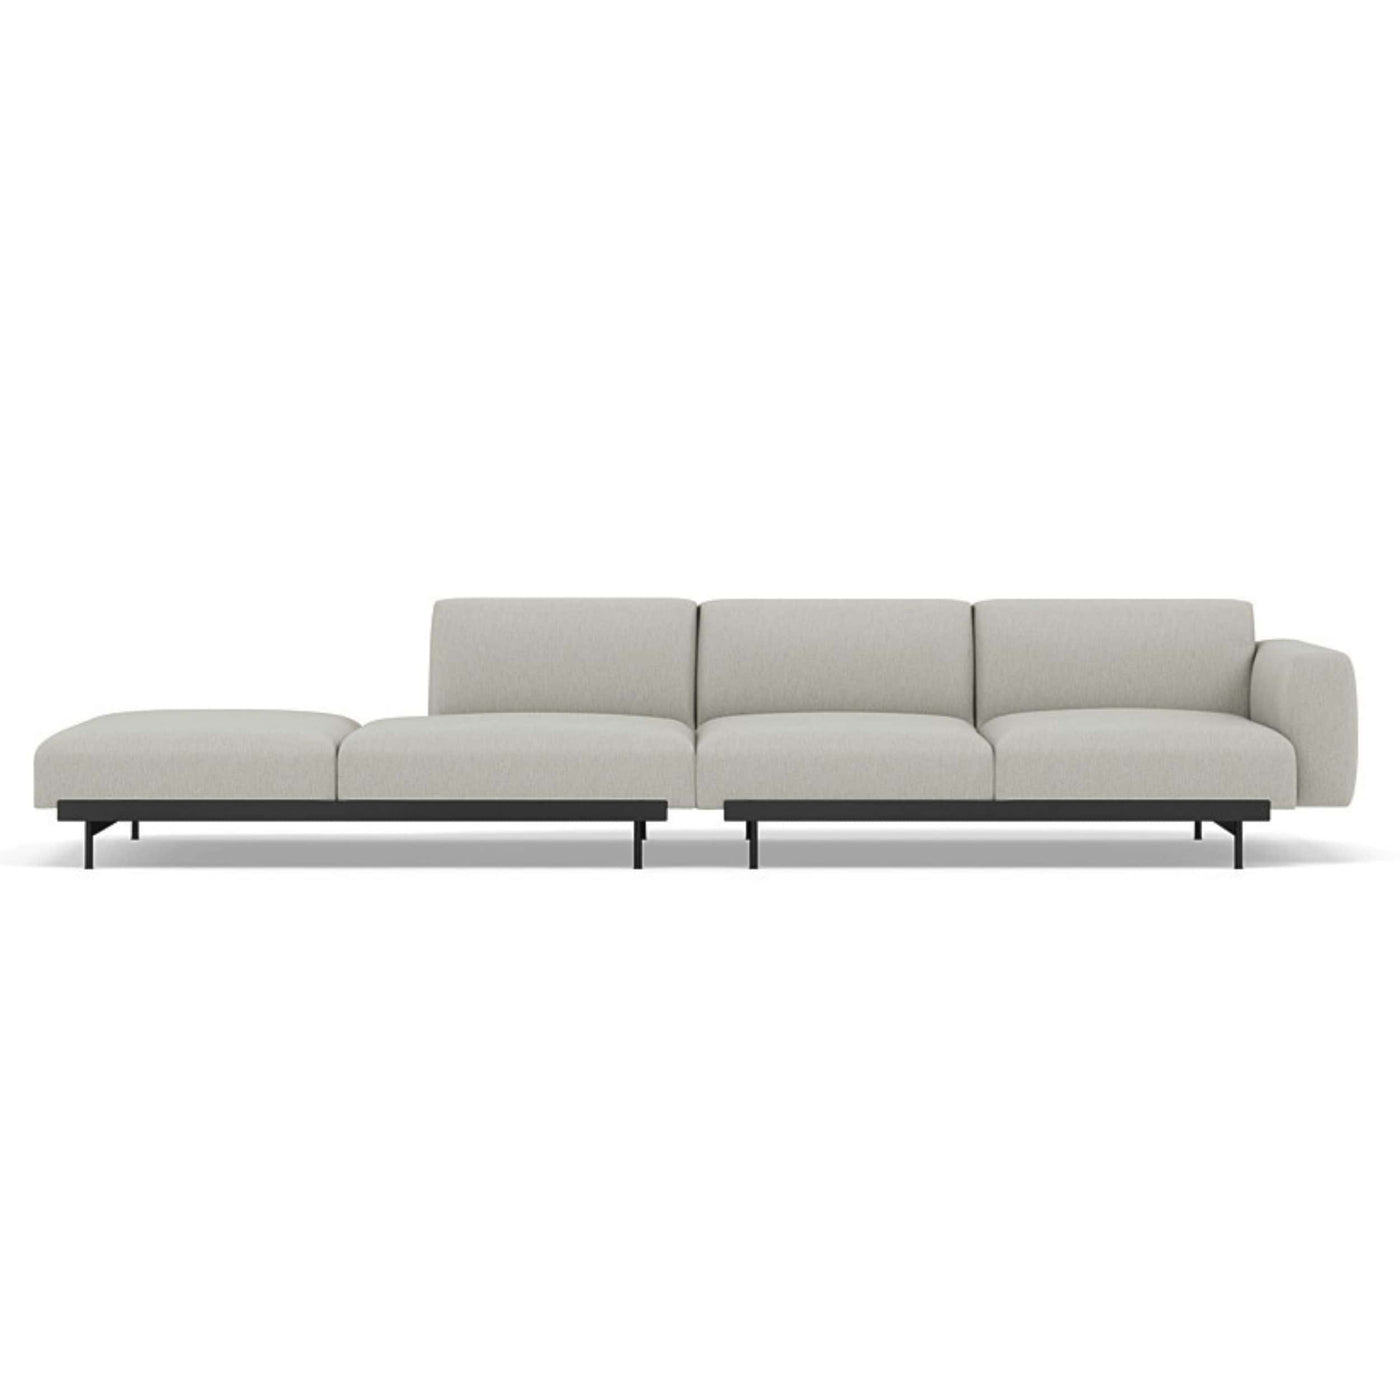 Muuto In Situ Modular 4 Seater Sofa configuration 3 in clay 12. Made to order from someday designs. #colour_clay-12